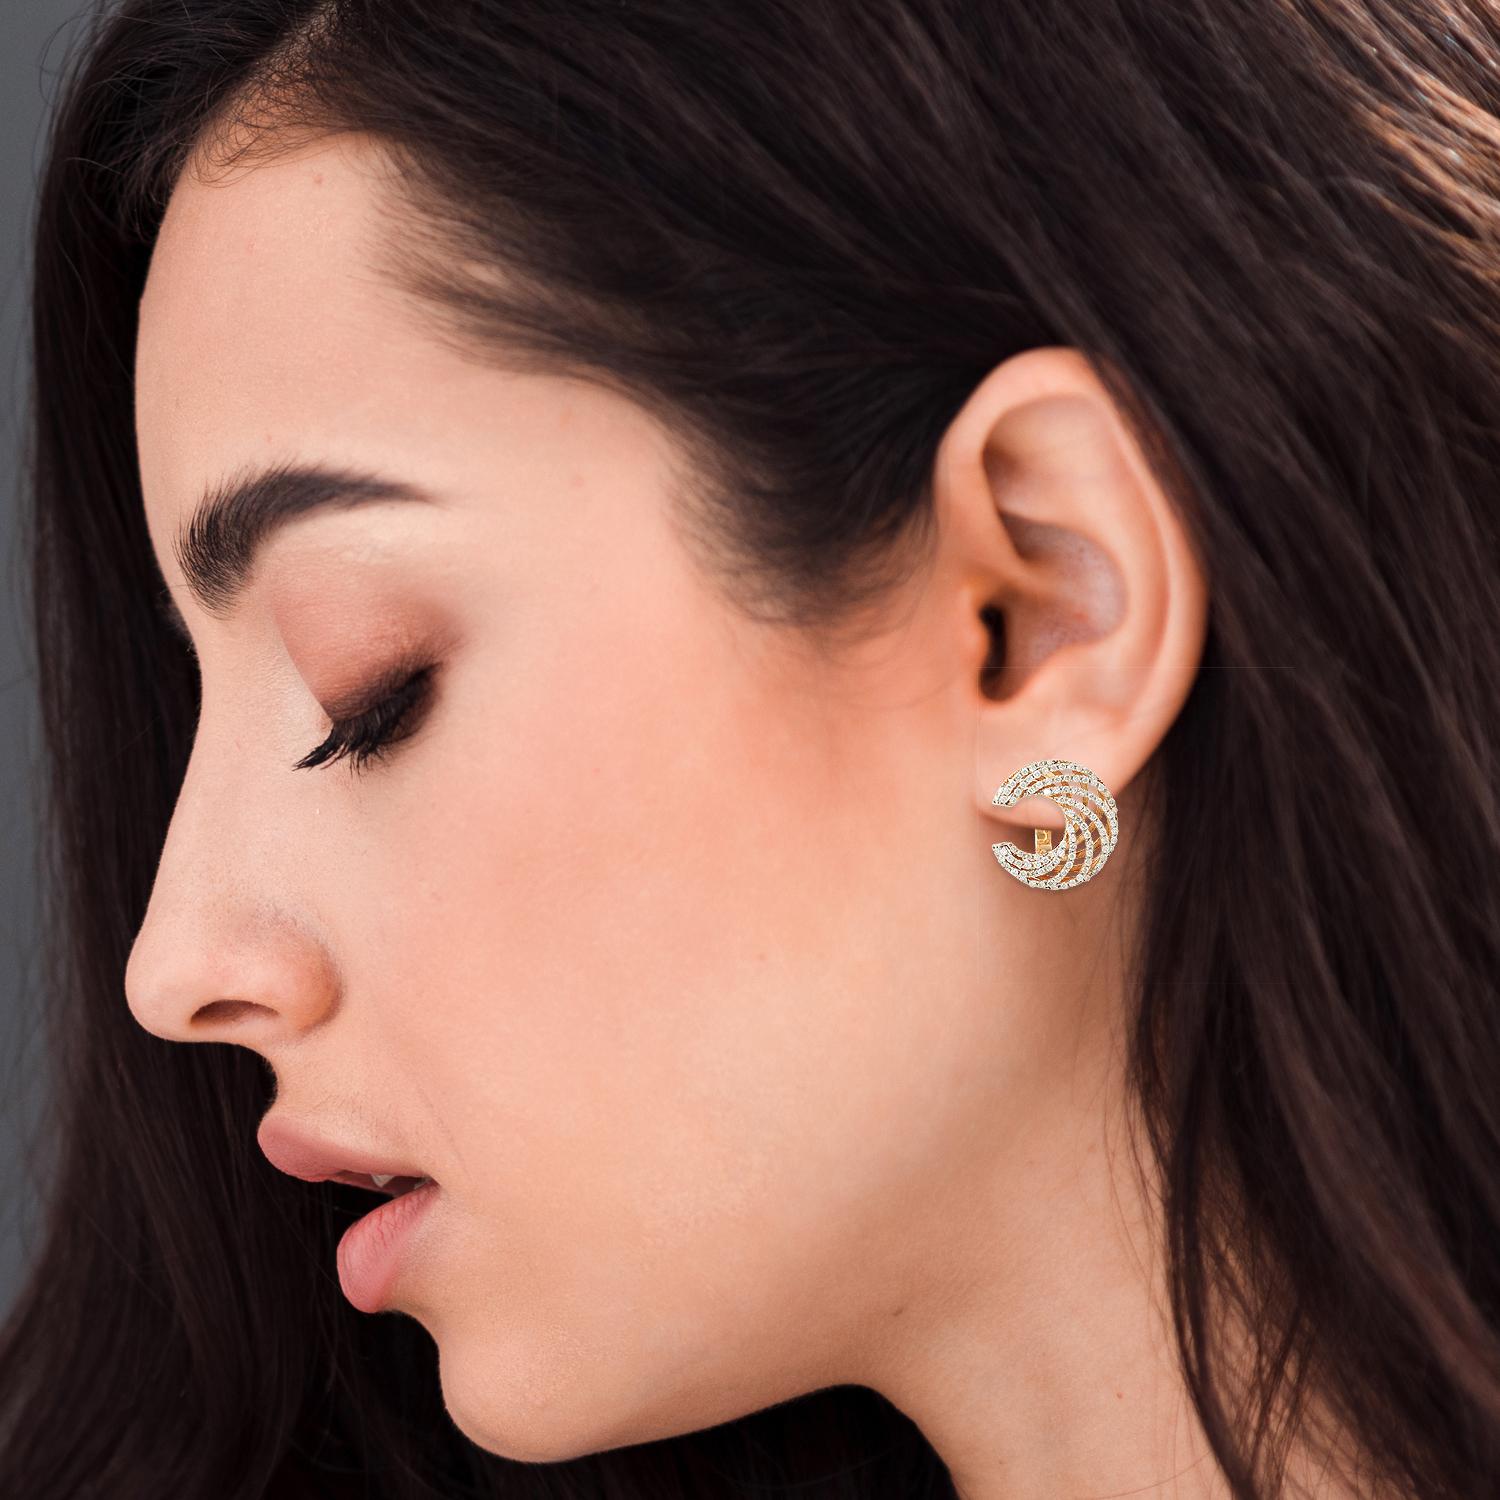 Cast from 18-karat rose gold, these beautiful earrings are encrusted with 1.10 carats of shimmering diamonds.  Available in rose, yellow and white gold.  Check out our other complimenting crescent collection pieces.

FOLLOW MEGHNA JEWELS storefront